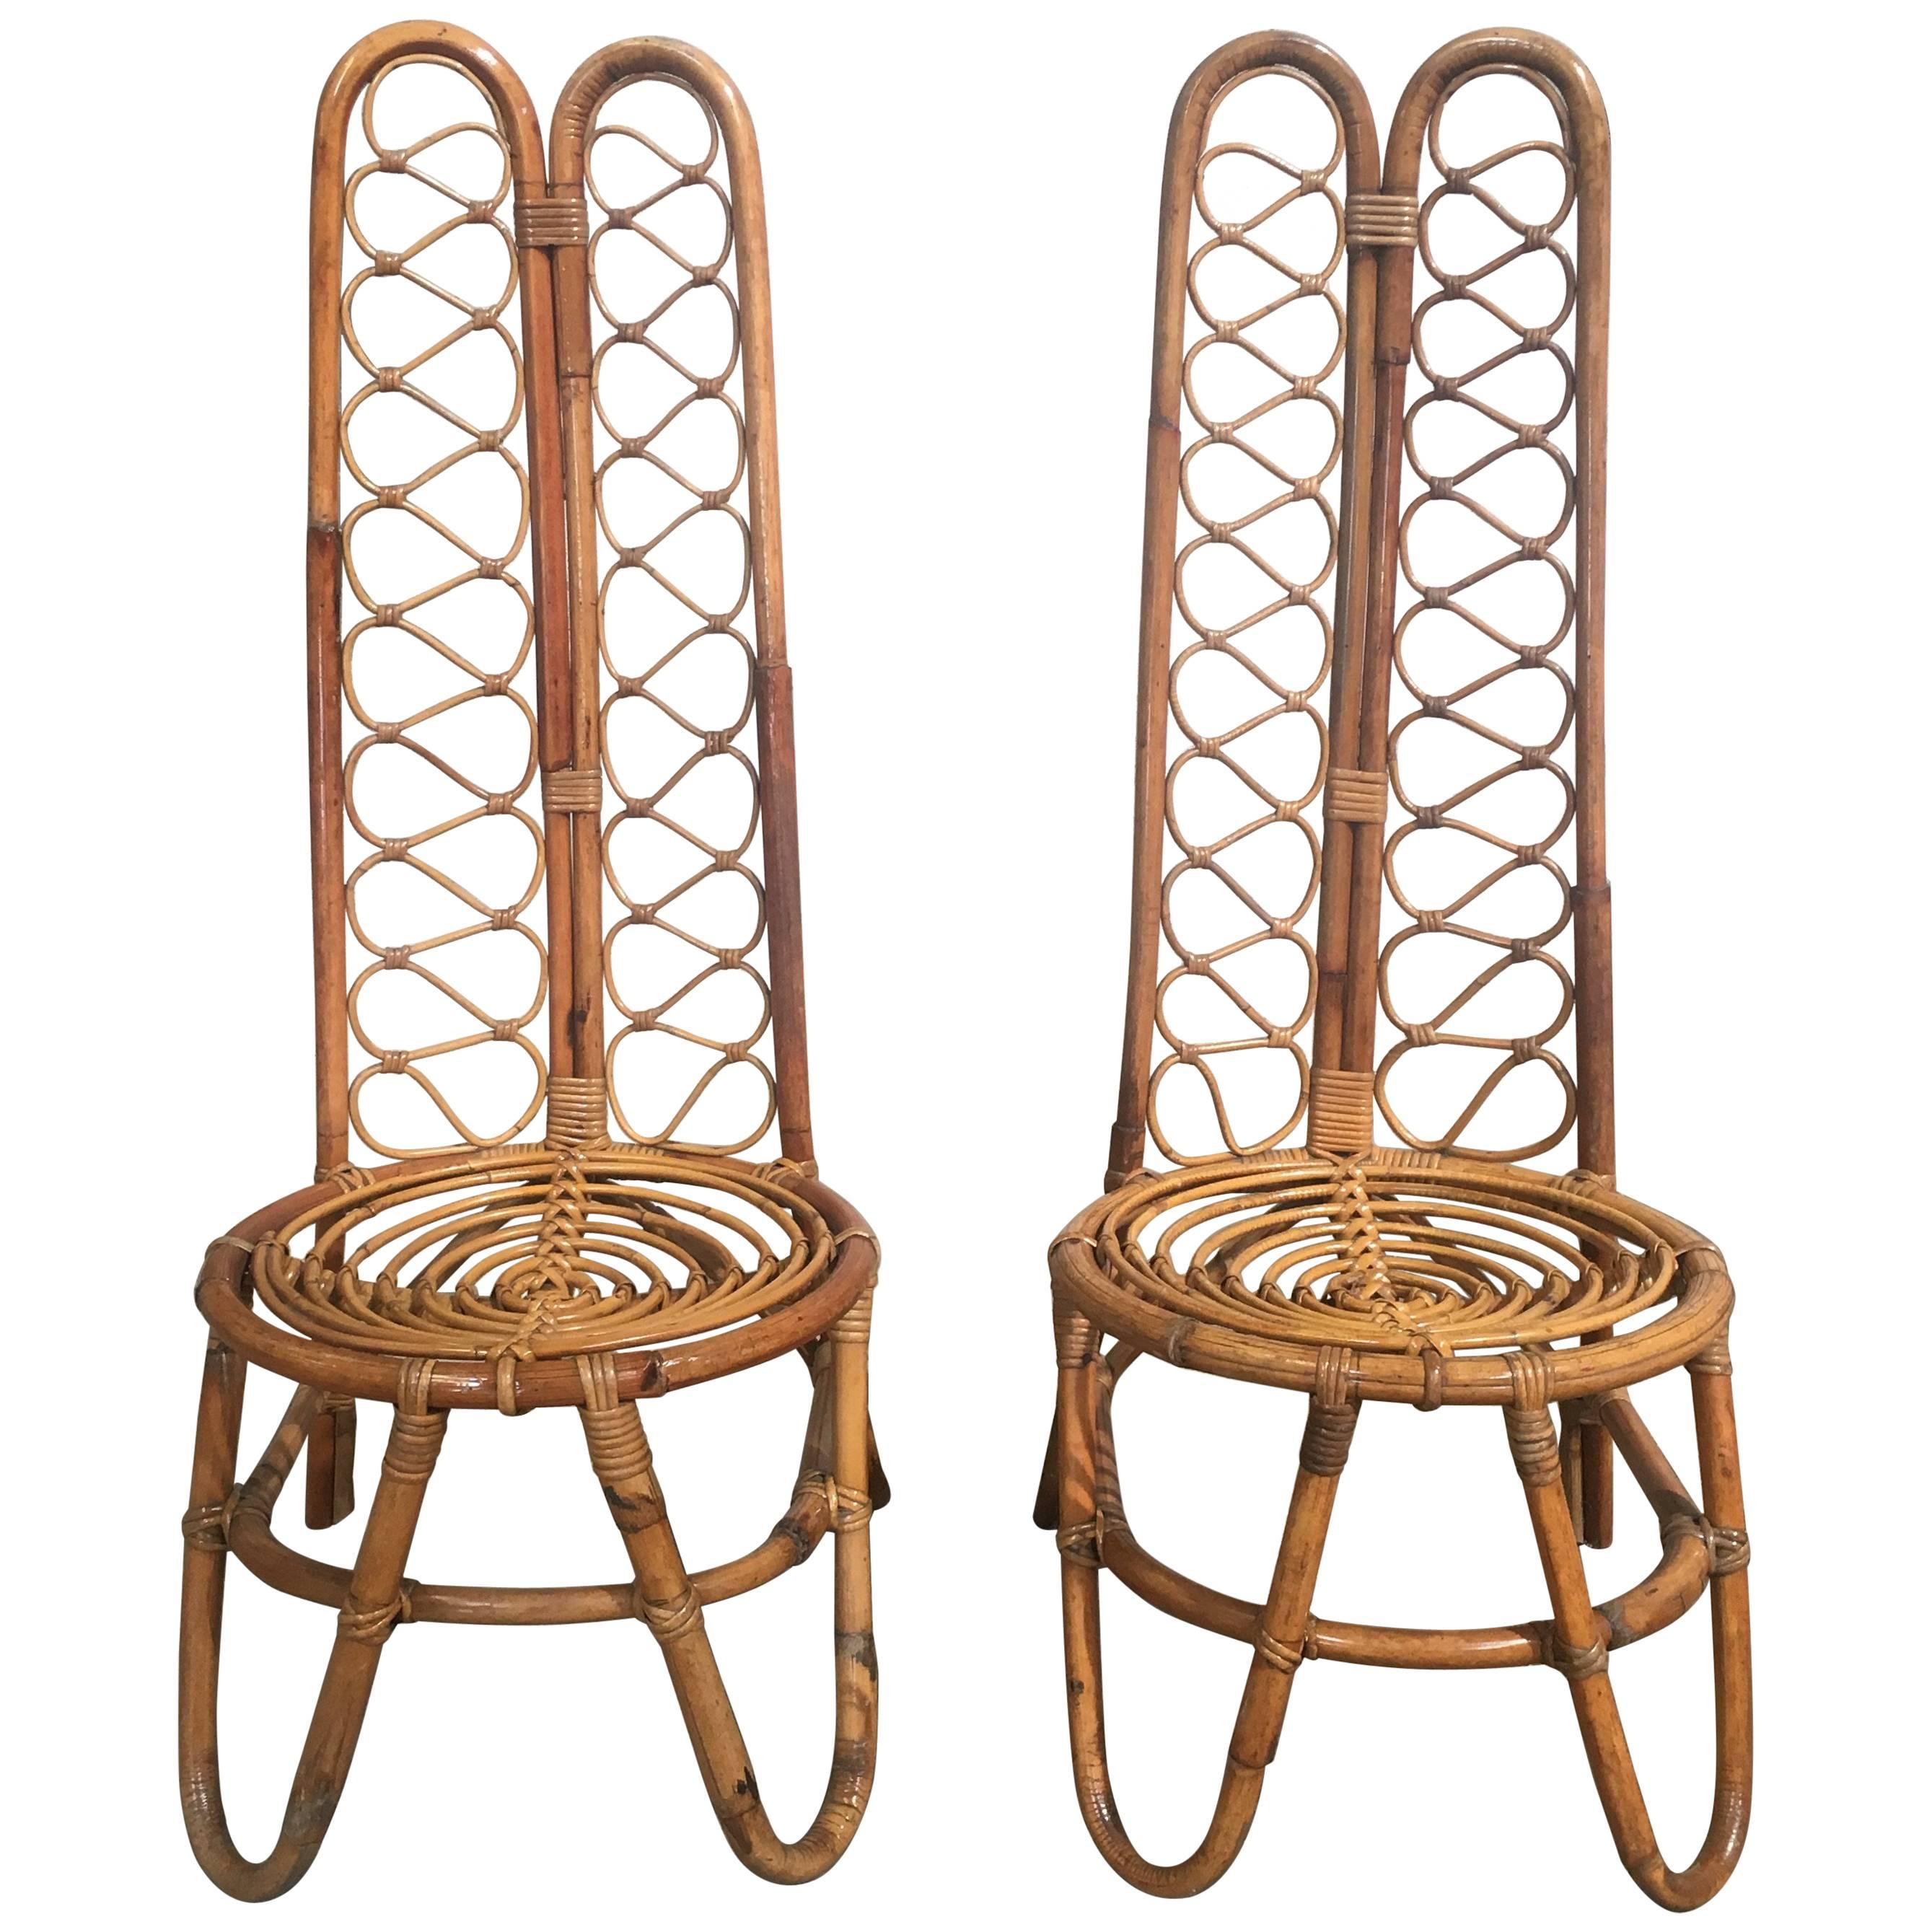 Pair of French Riviera Midcentury Bamboo Chairs with High Back from 1970s